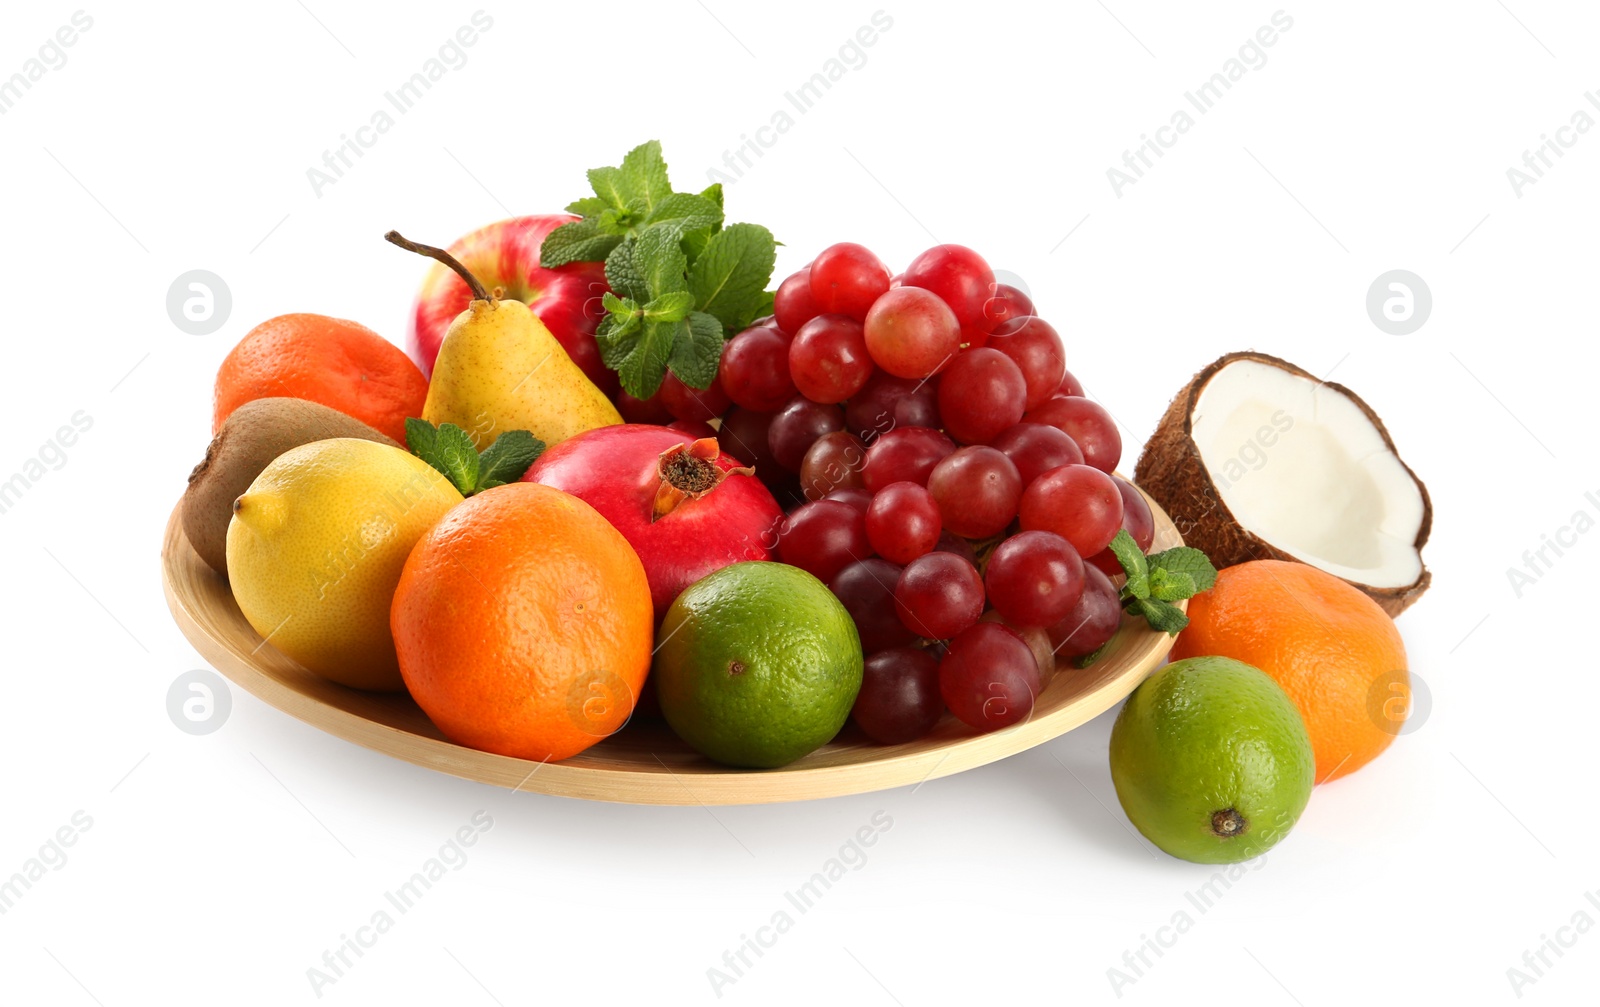 Photo of Wooden plate and different ripe fruits on white background